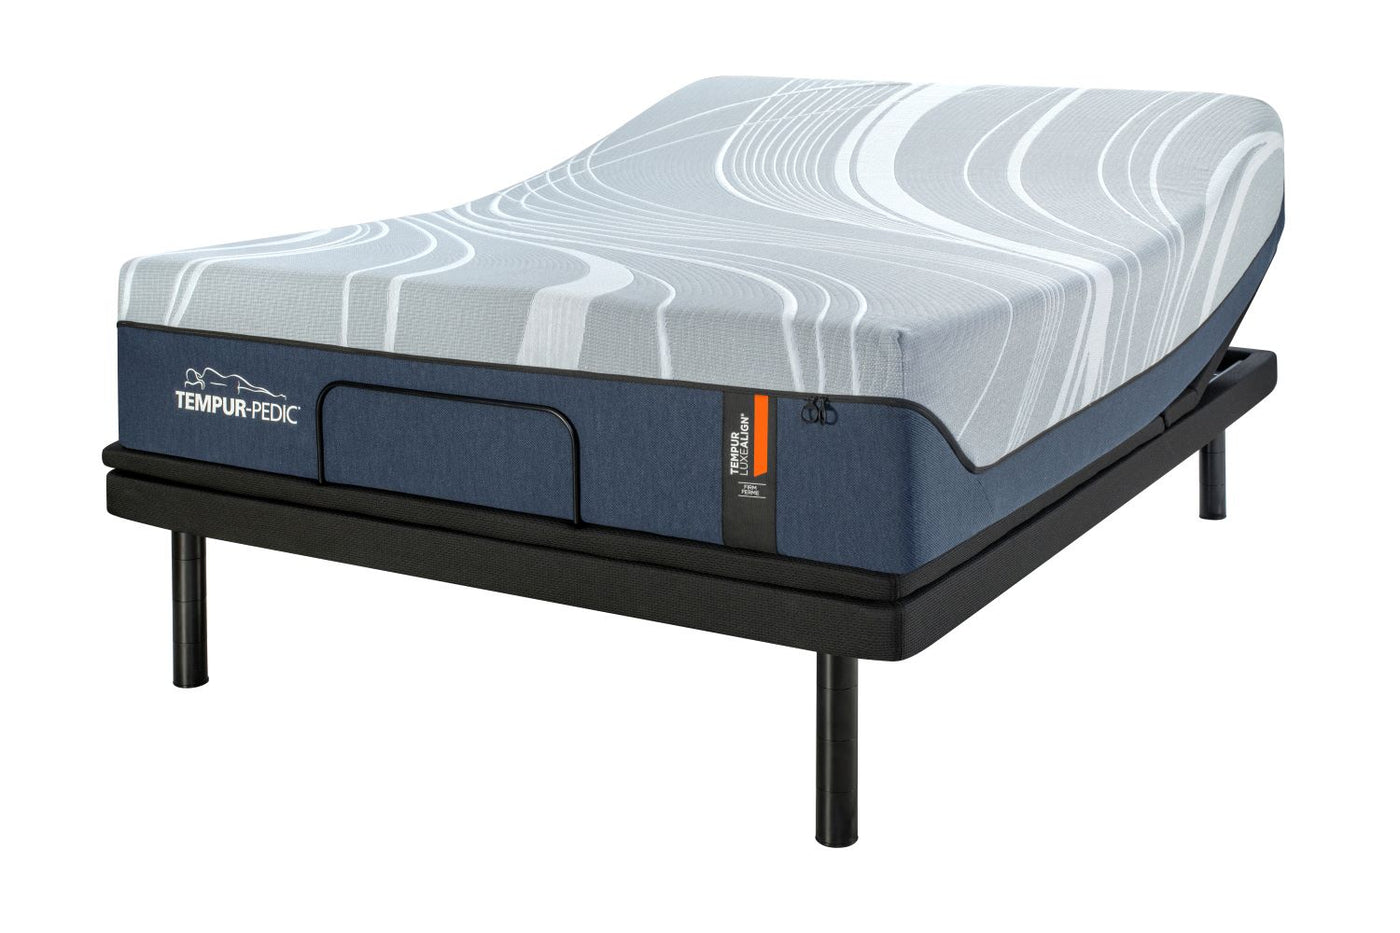 Tempur-Pedic LuxeAlign® 2.0 Firm 13" Twin XL Mattress and L2 Motion Pro Adjustable Base